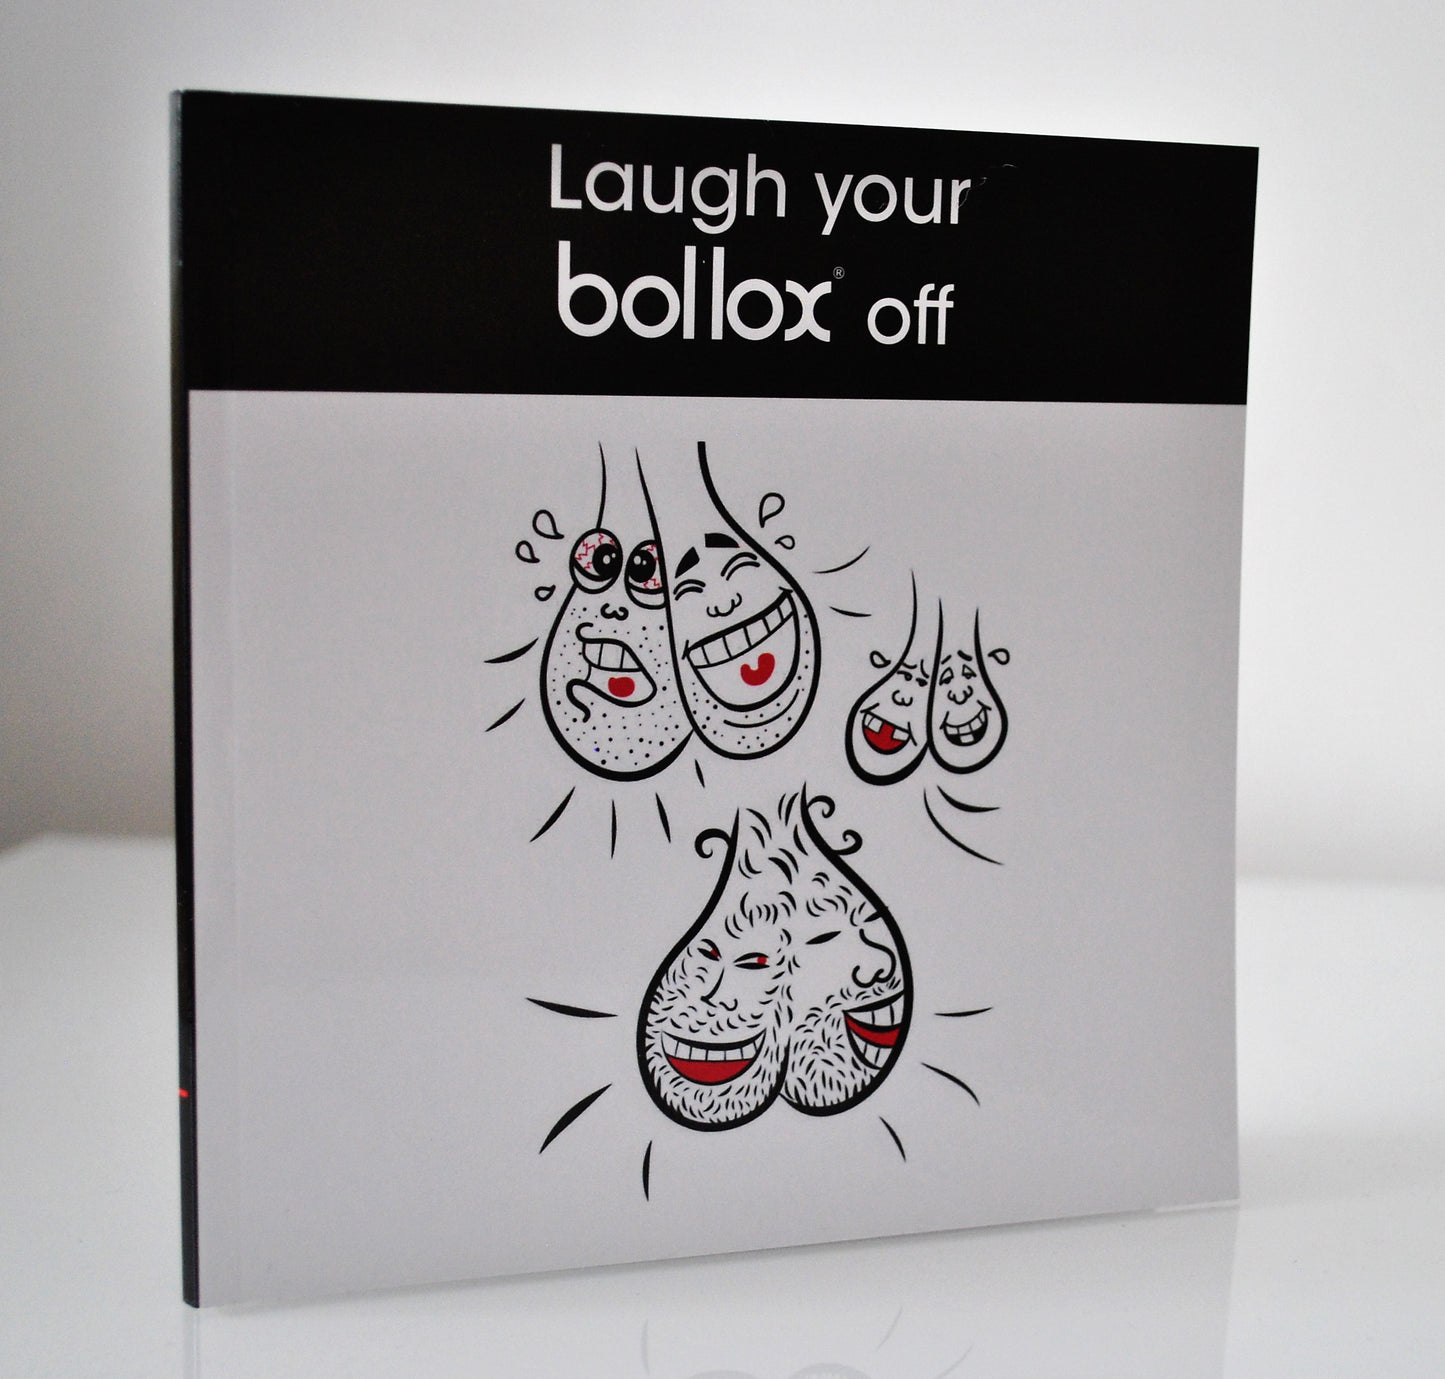 'Laugh Your Bollox Off' book